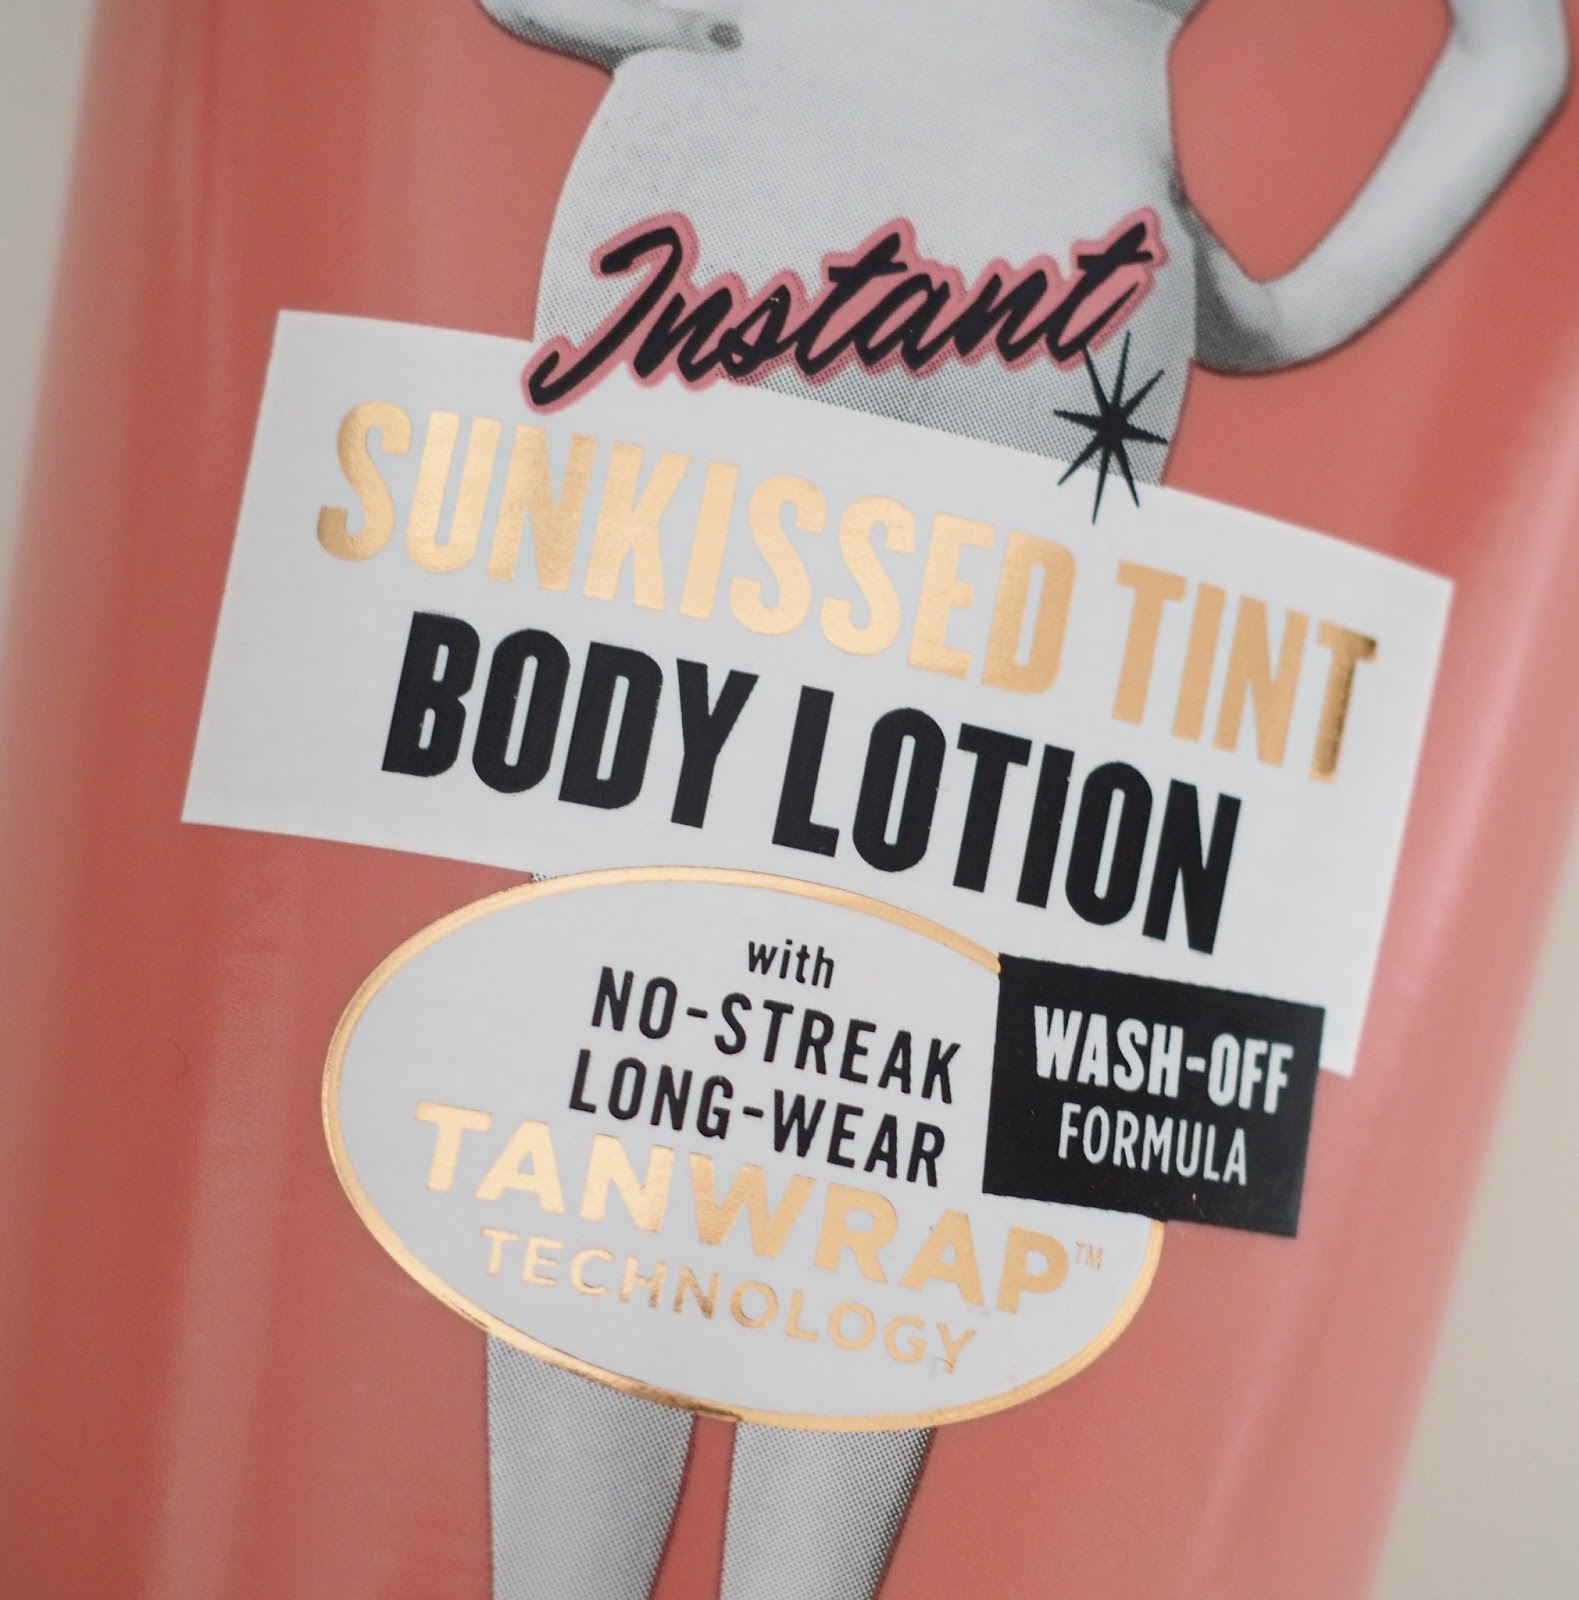 Soap & Glory Righteous butter instant tan body lotion self tan beauty